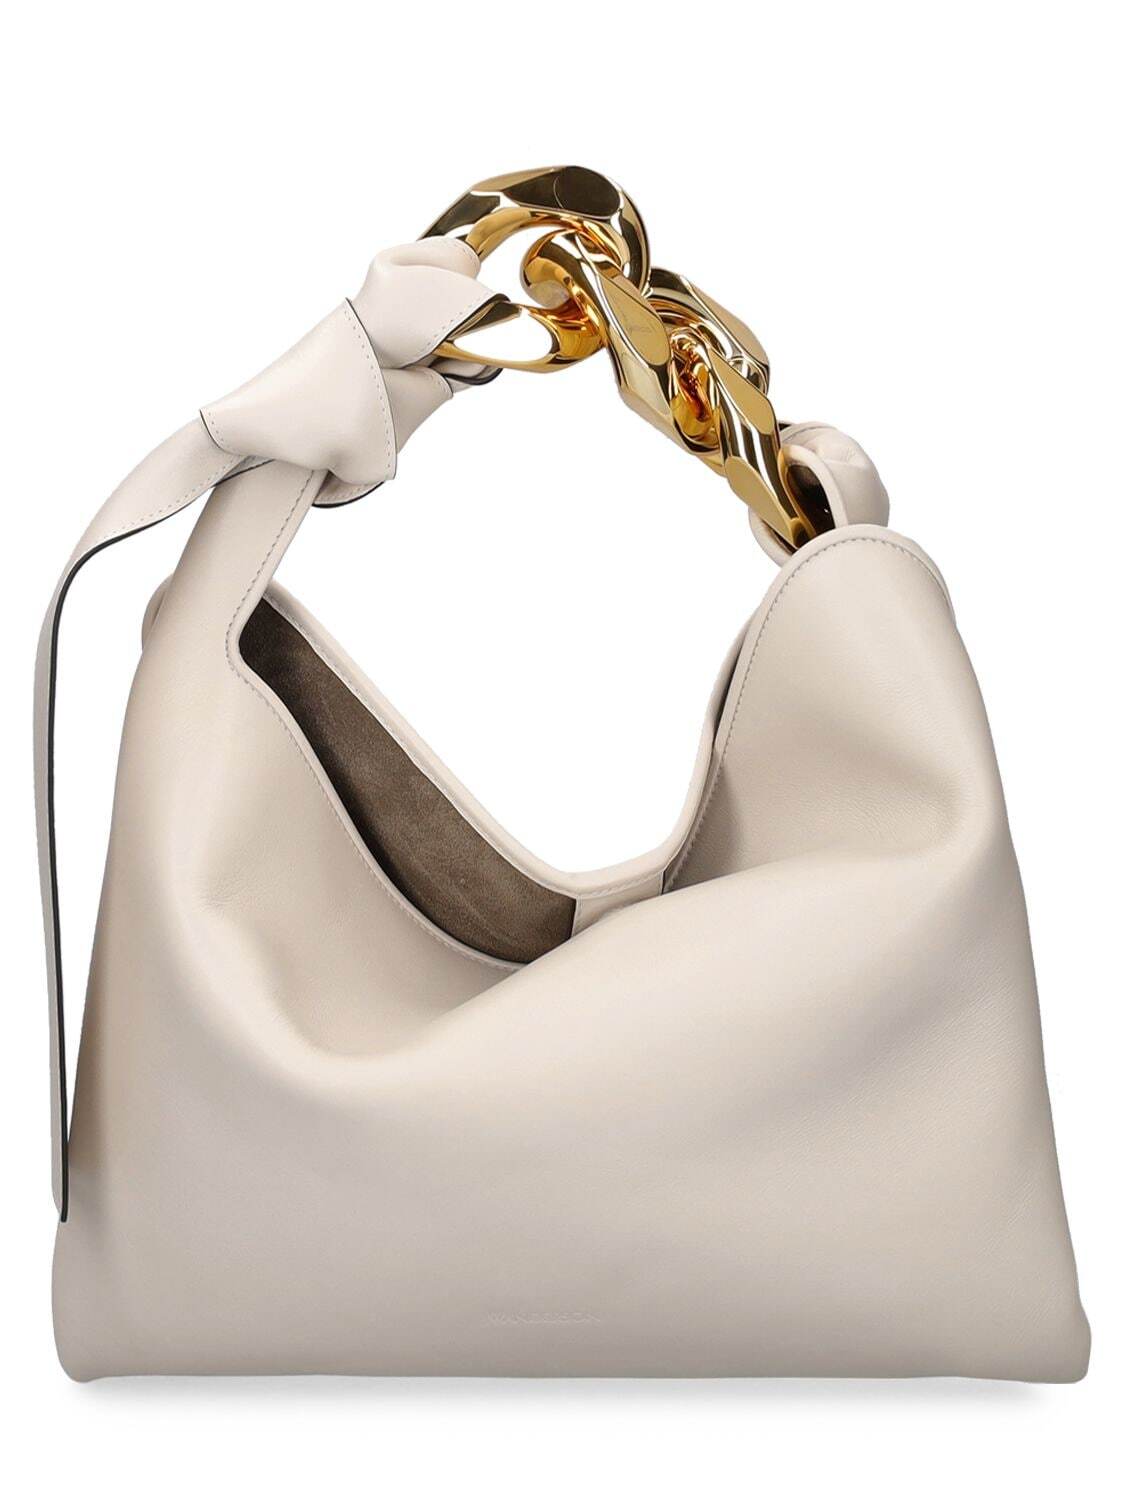 JW ANDERSON Small Chain Leather Hobo Bag in white